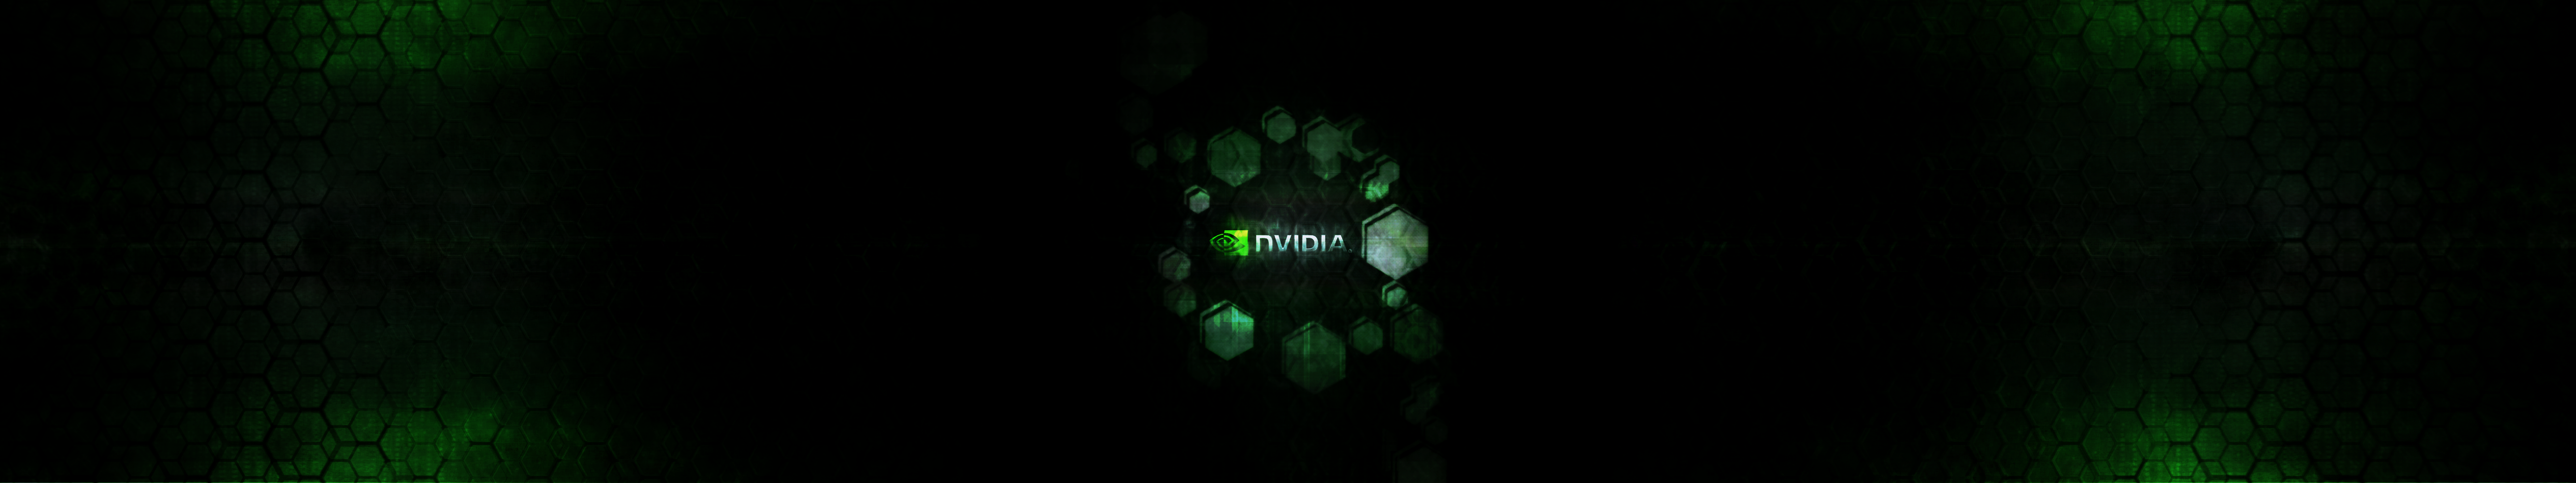 Nvidia Surround Wallpaper Picture Pictures